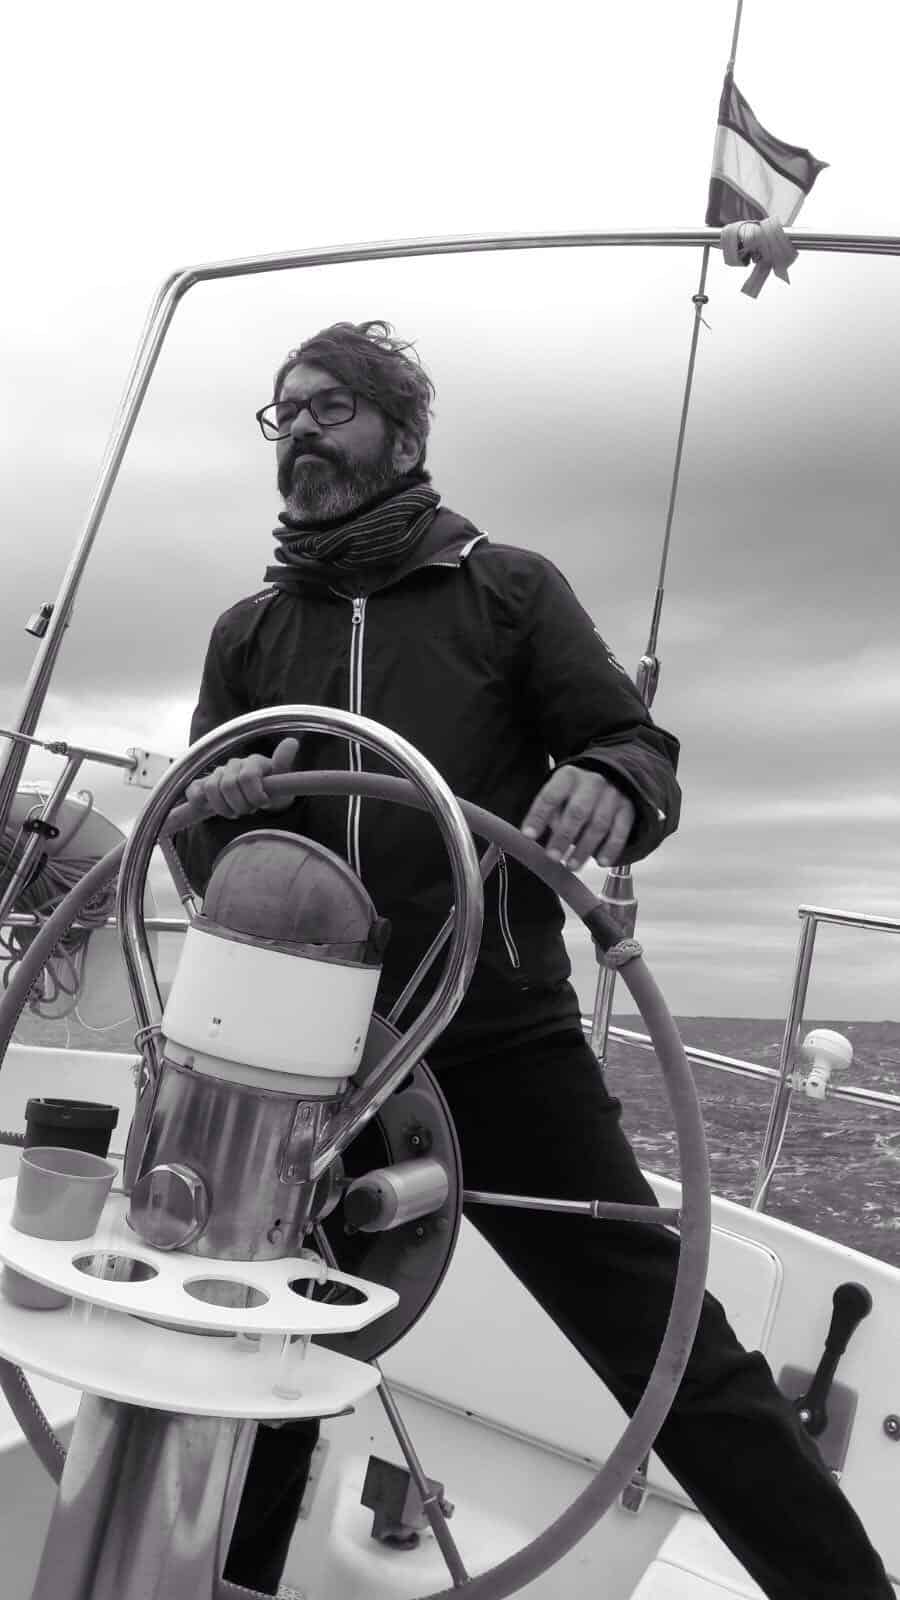 Professional yachtmaster at the helm sailing a yacht on delivery